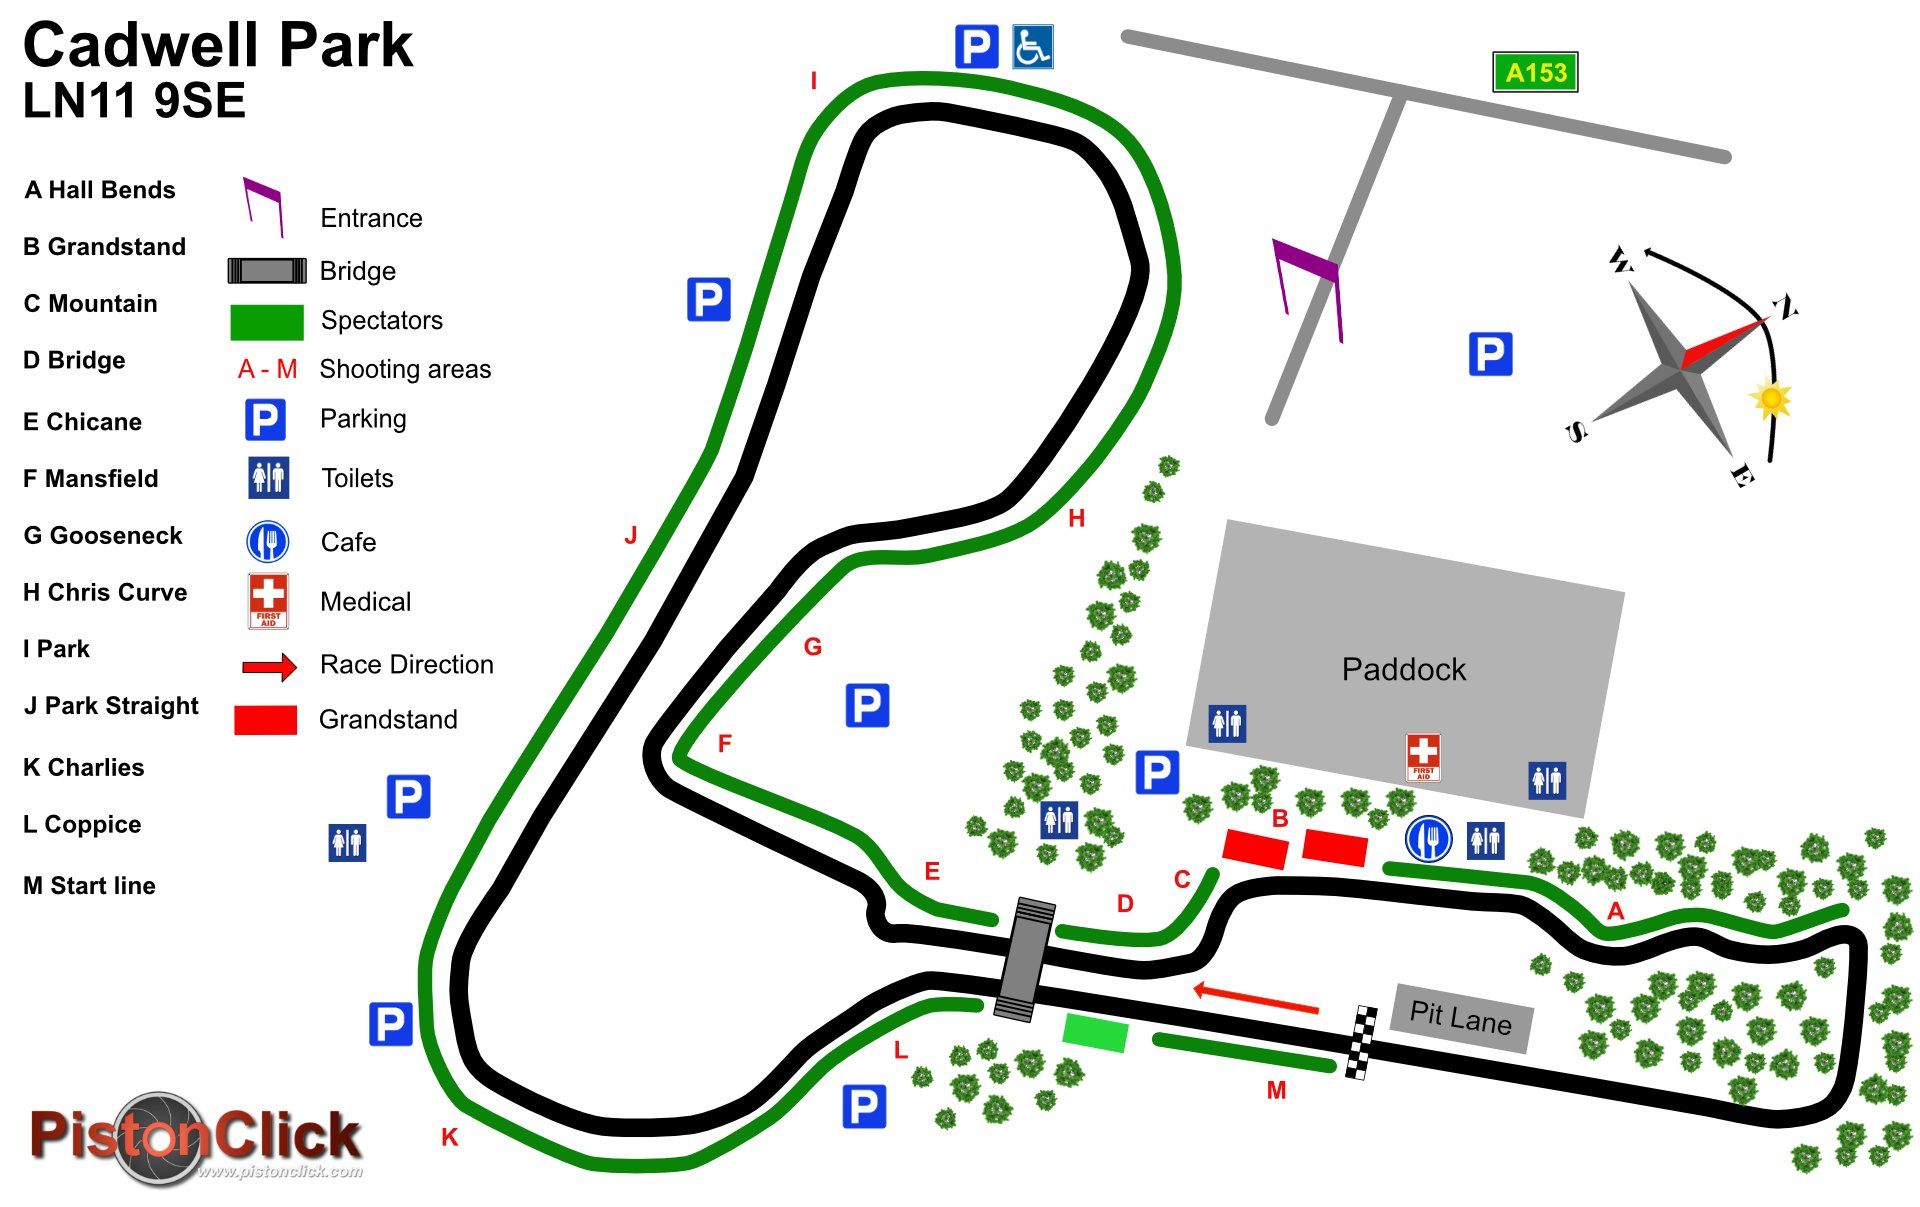 Photographic guide Cadwell Park